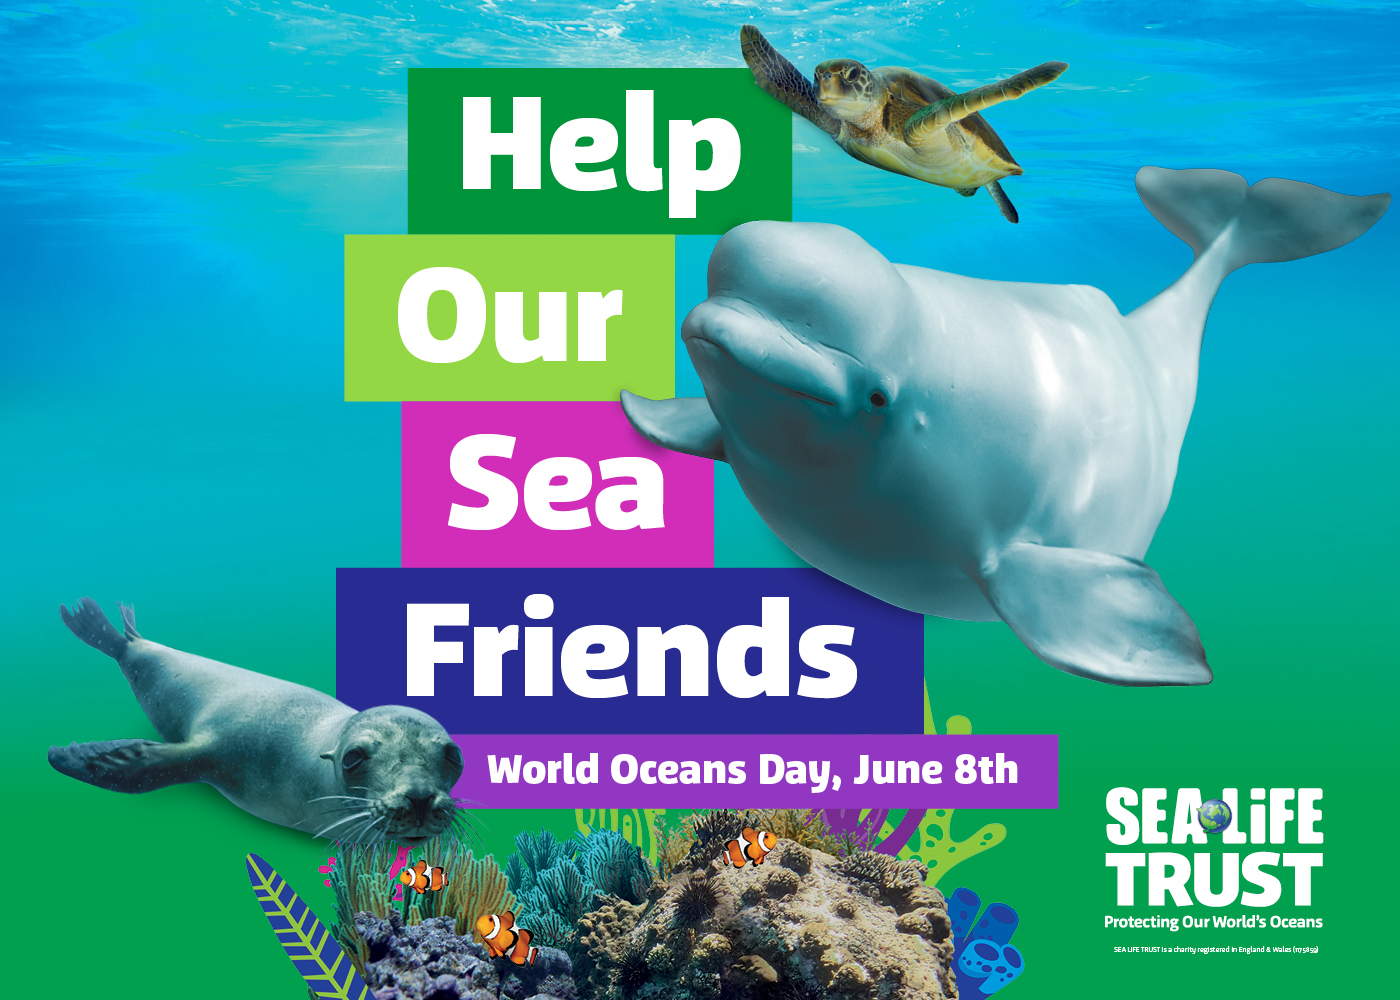 Image of Help Our Sea Friends banner- Worlds Oceans Day June 8th